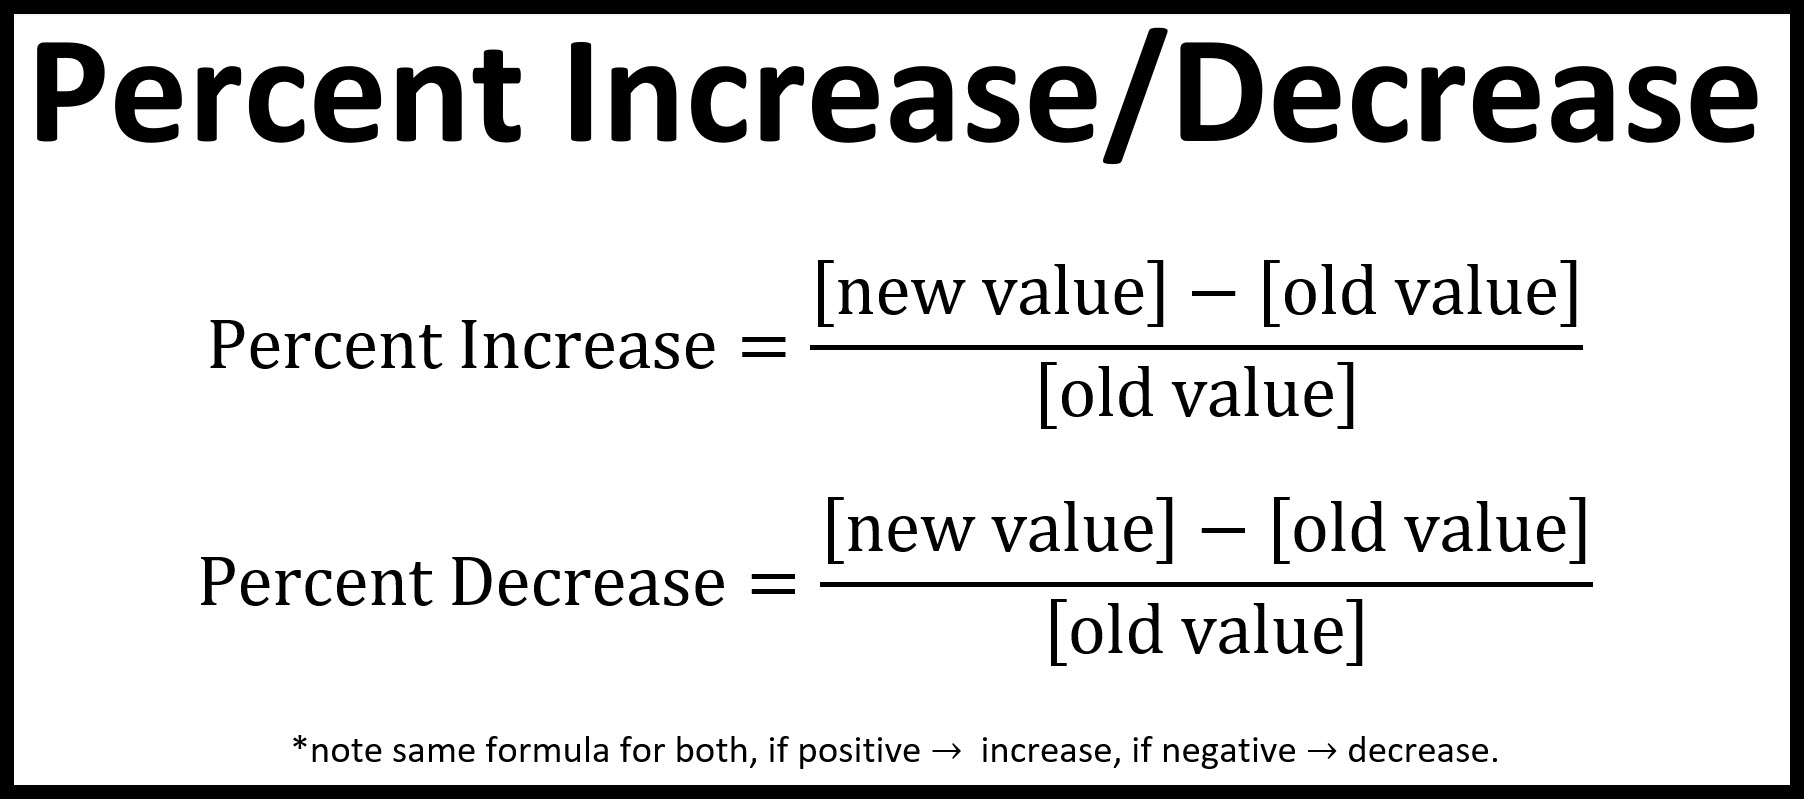 Primary Notes for Percent Increase and Percent Decrease Formula